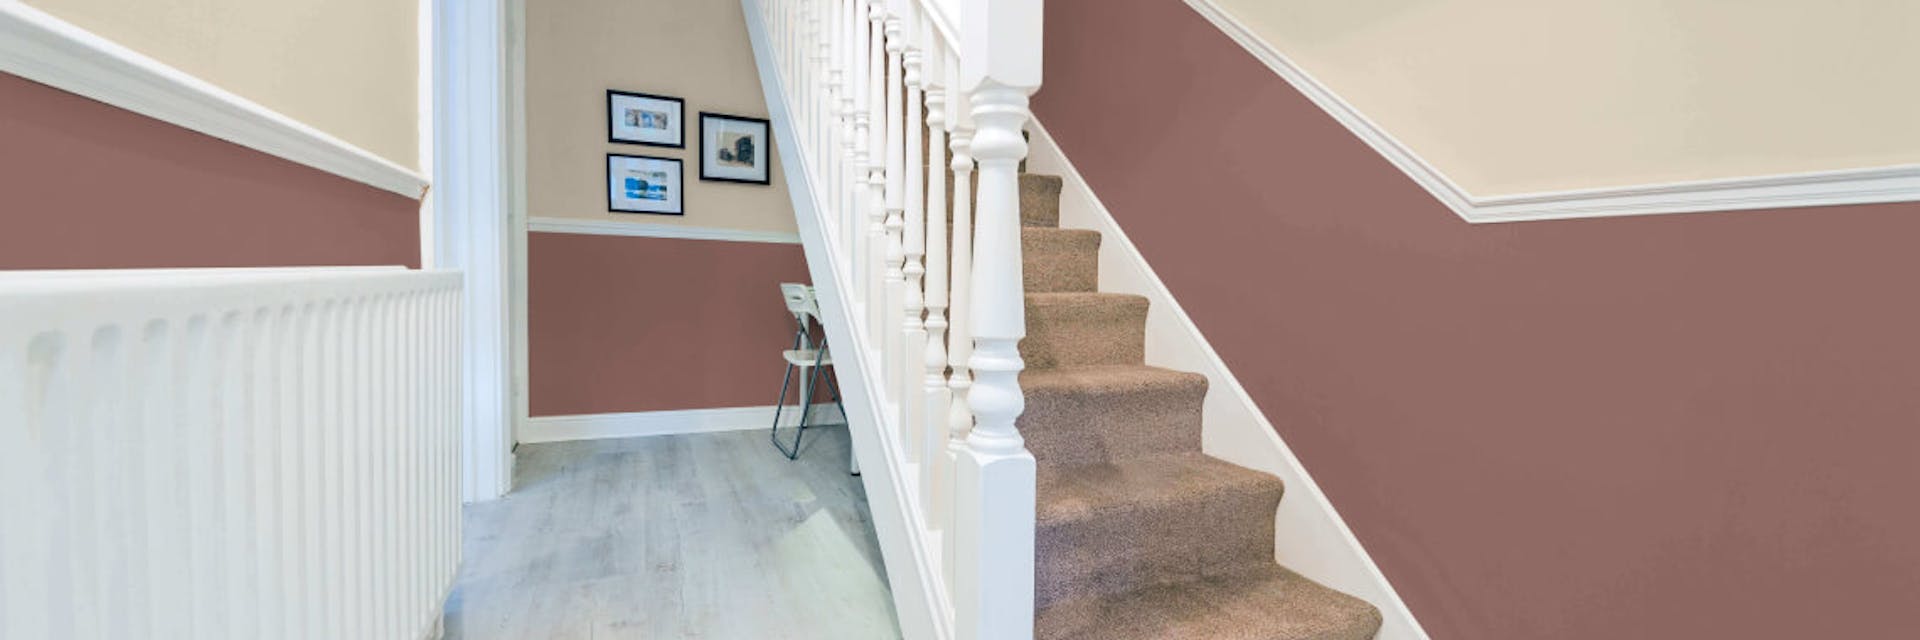 Hallway painted with a Johnstone's cream and red paint colours